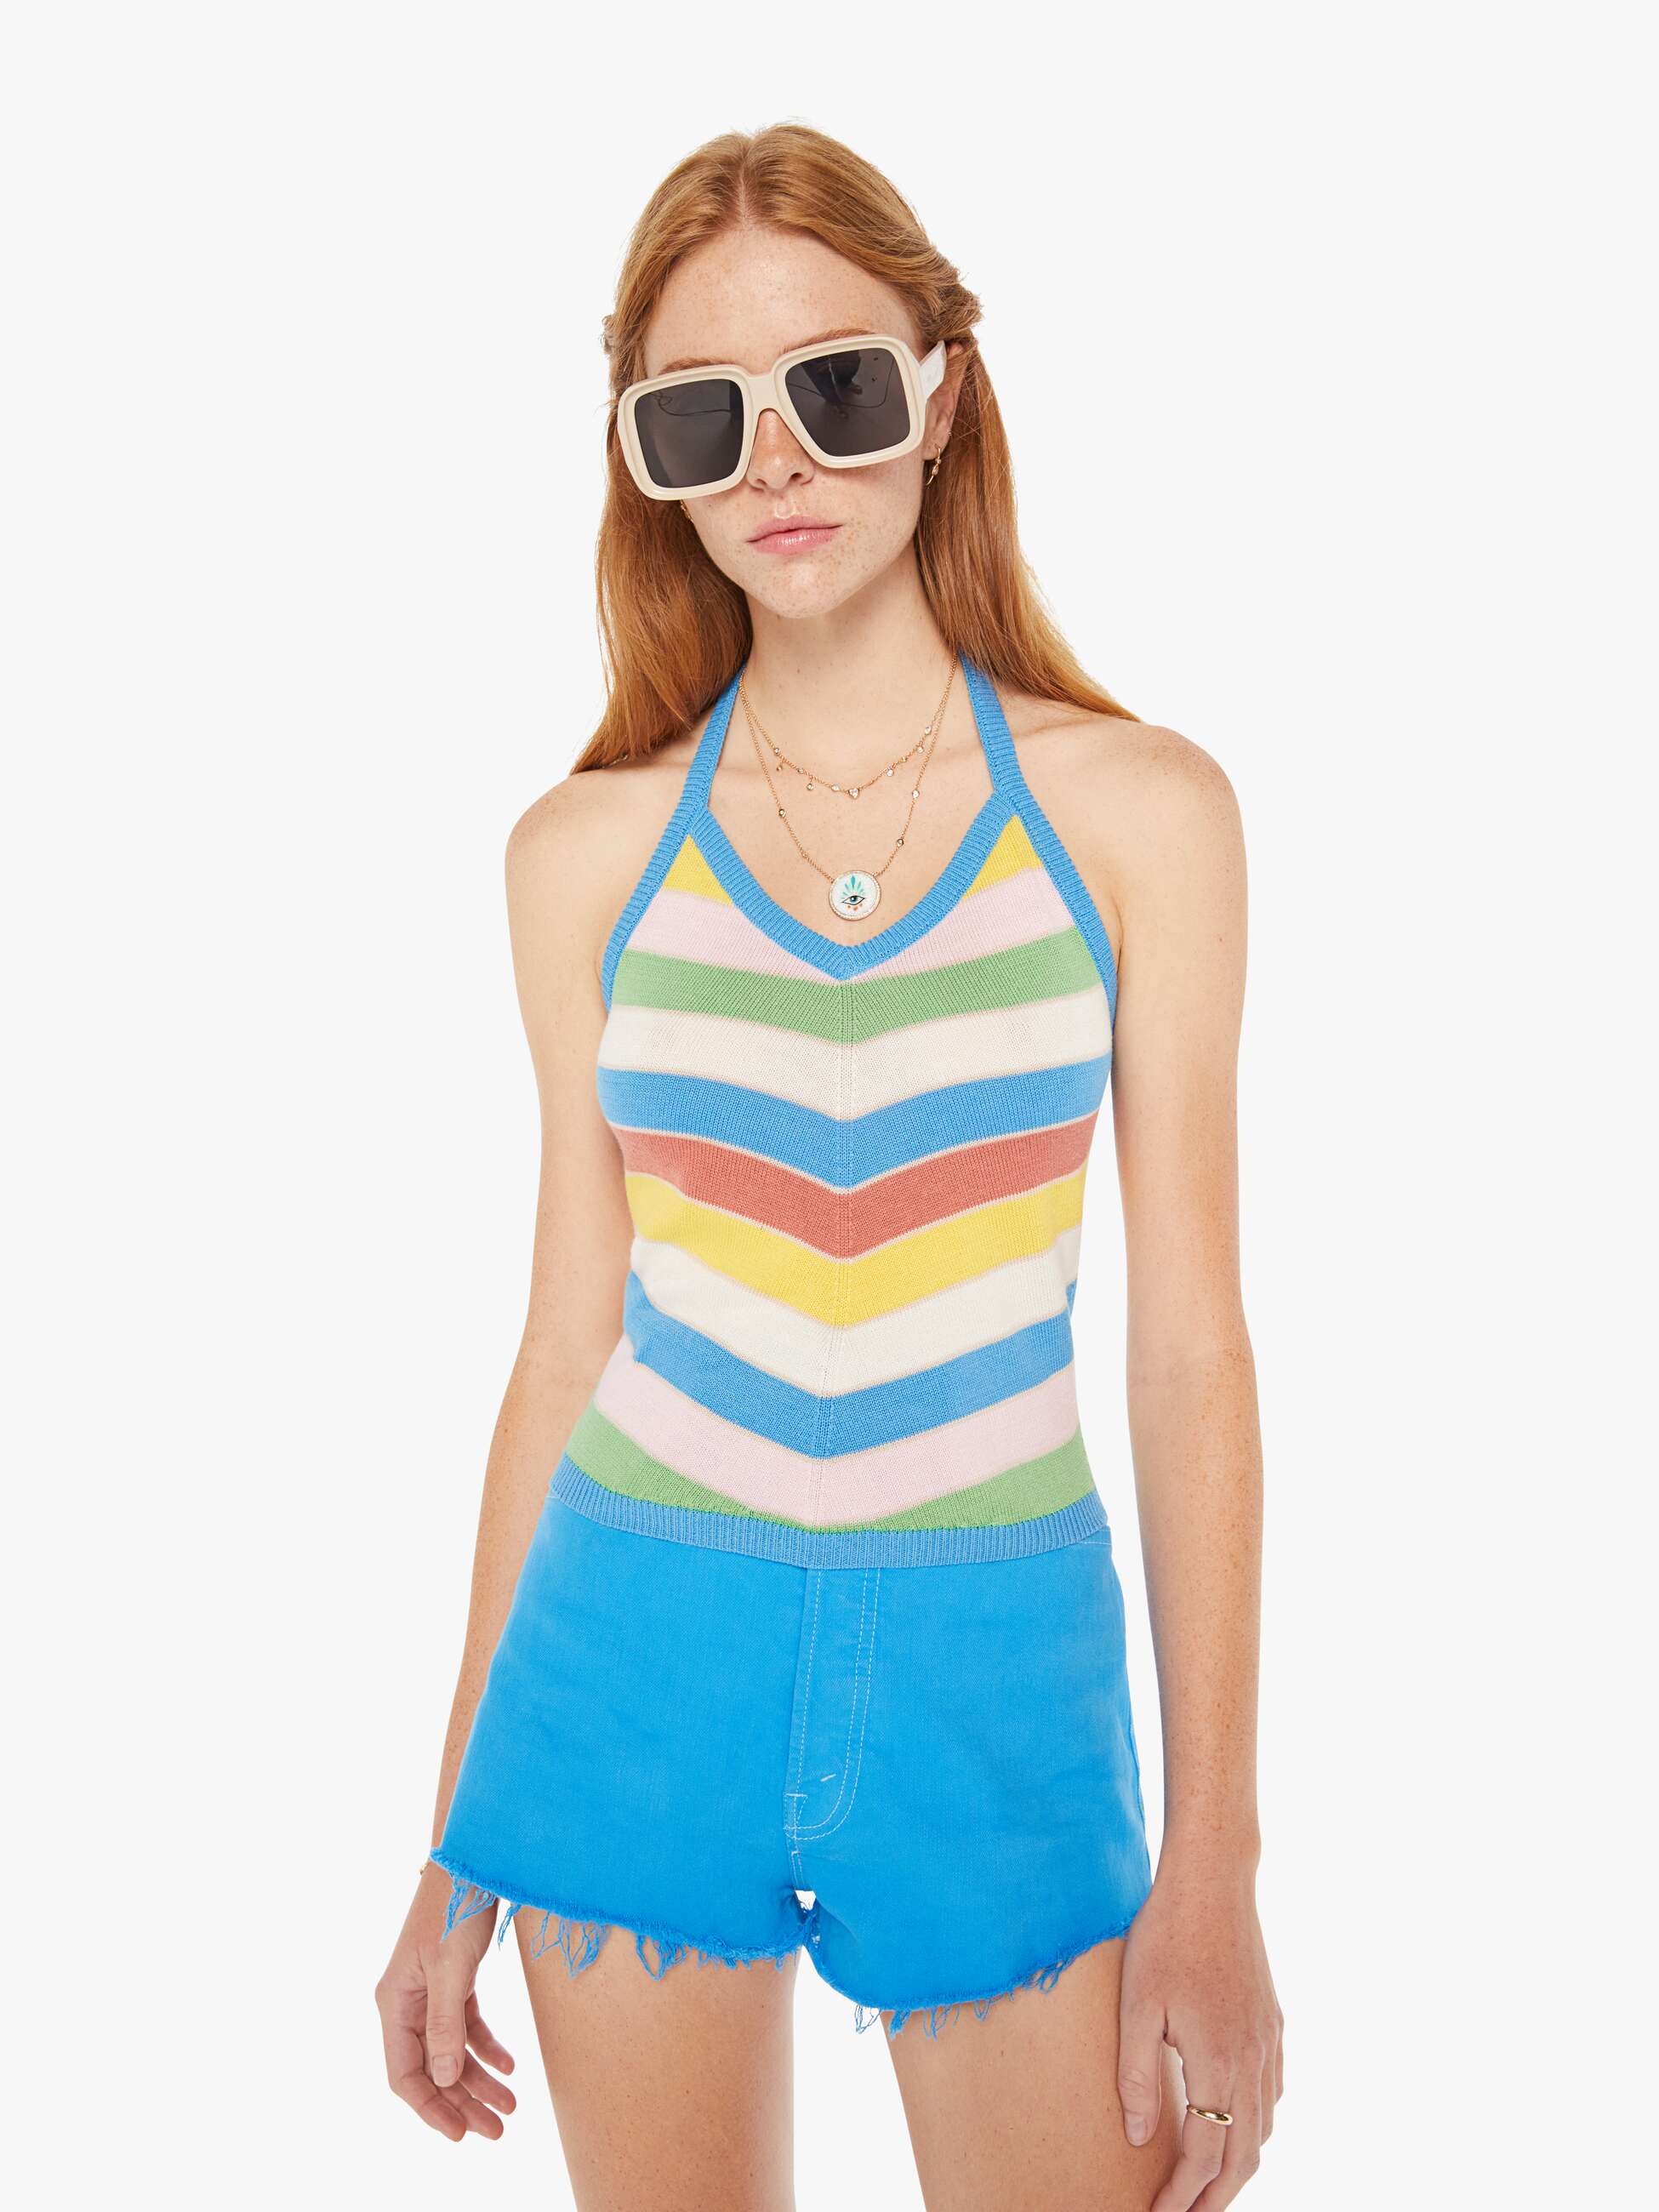 The Back At You Top - Multi Light Blue Stripe